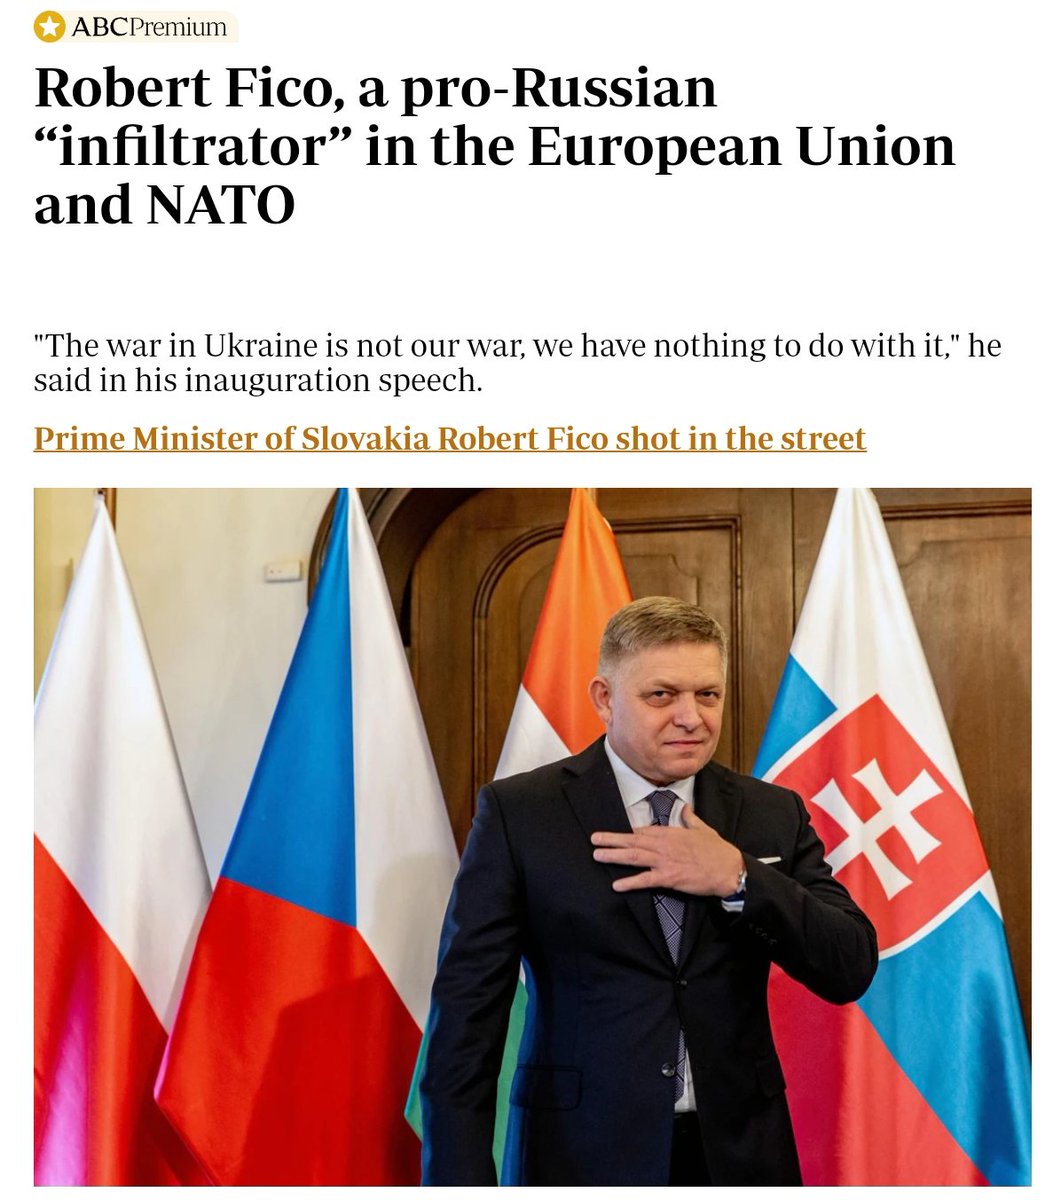 The best definition of what Fico is. He never showed any empathy for the suffering of the Ukrainian people. #lvic